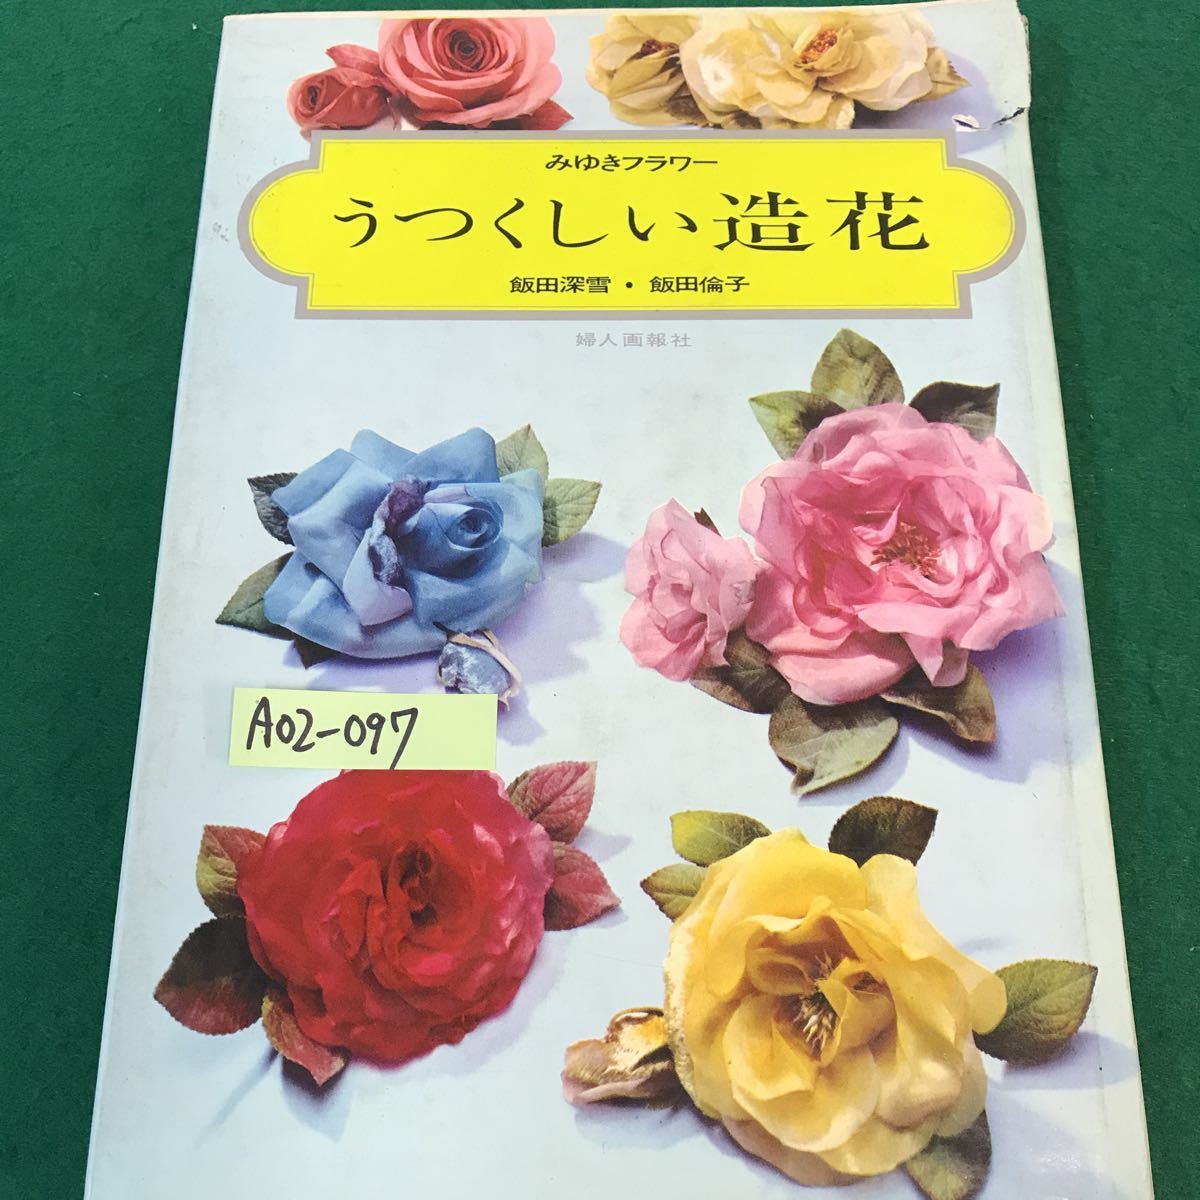 A02-097... flower *.. comb . artificial flower. author *. rice field deep snow *. rice field Michiko. woman .. company. Showa era 47 year 5 month 15 day two 10 7 issue. issue person *book@. confidence male.